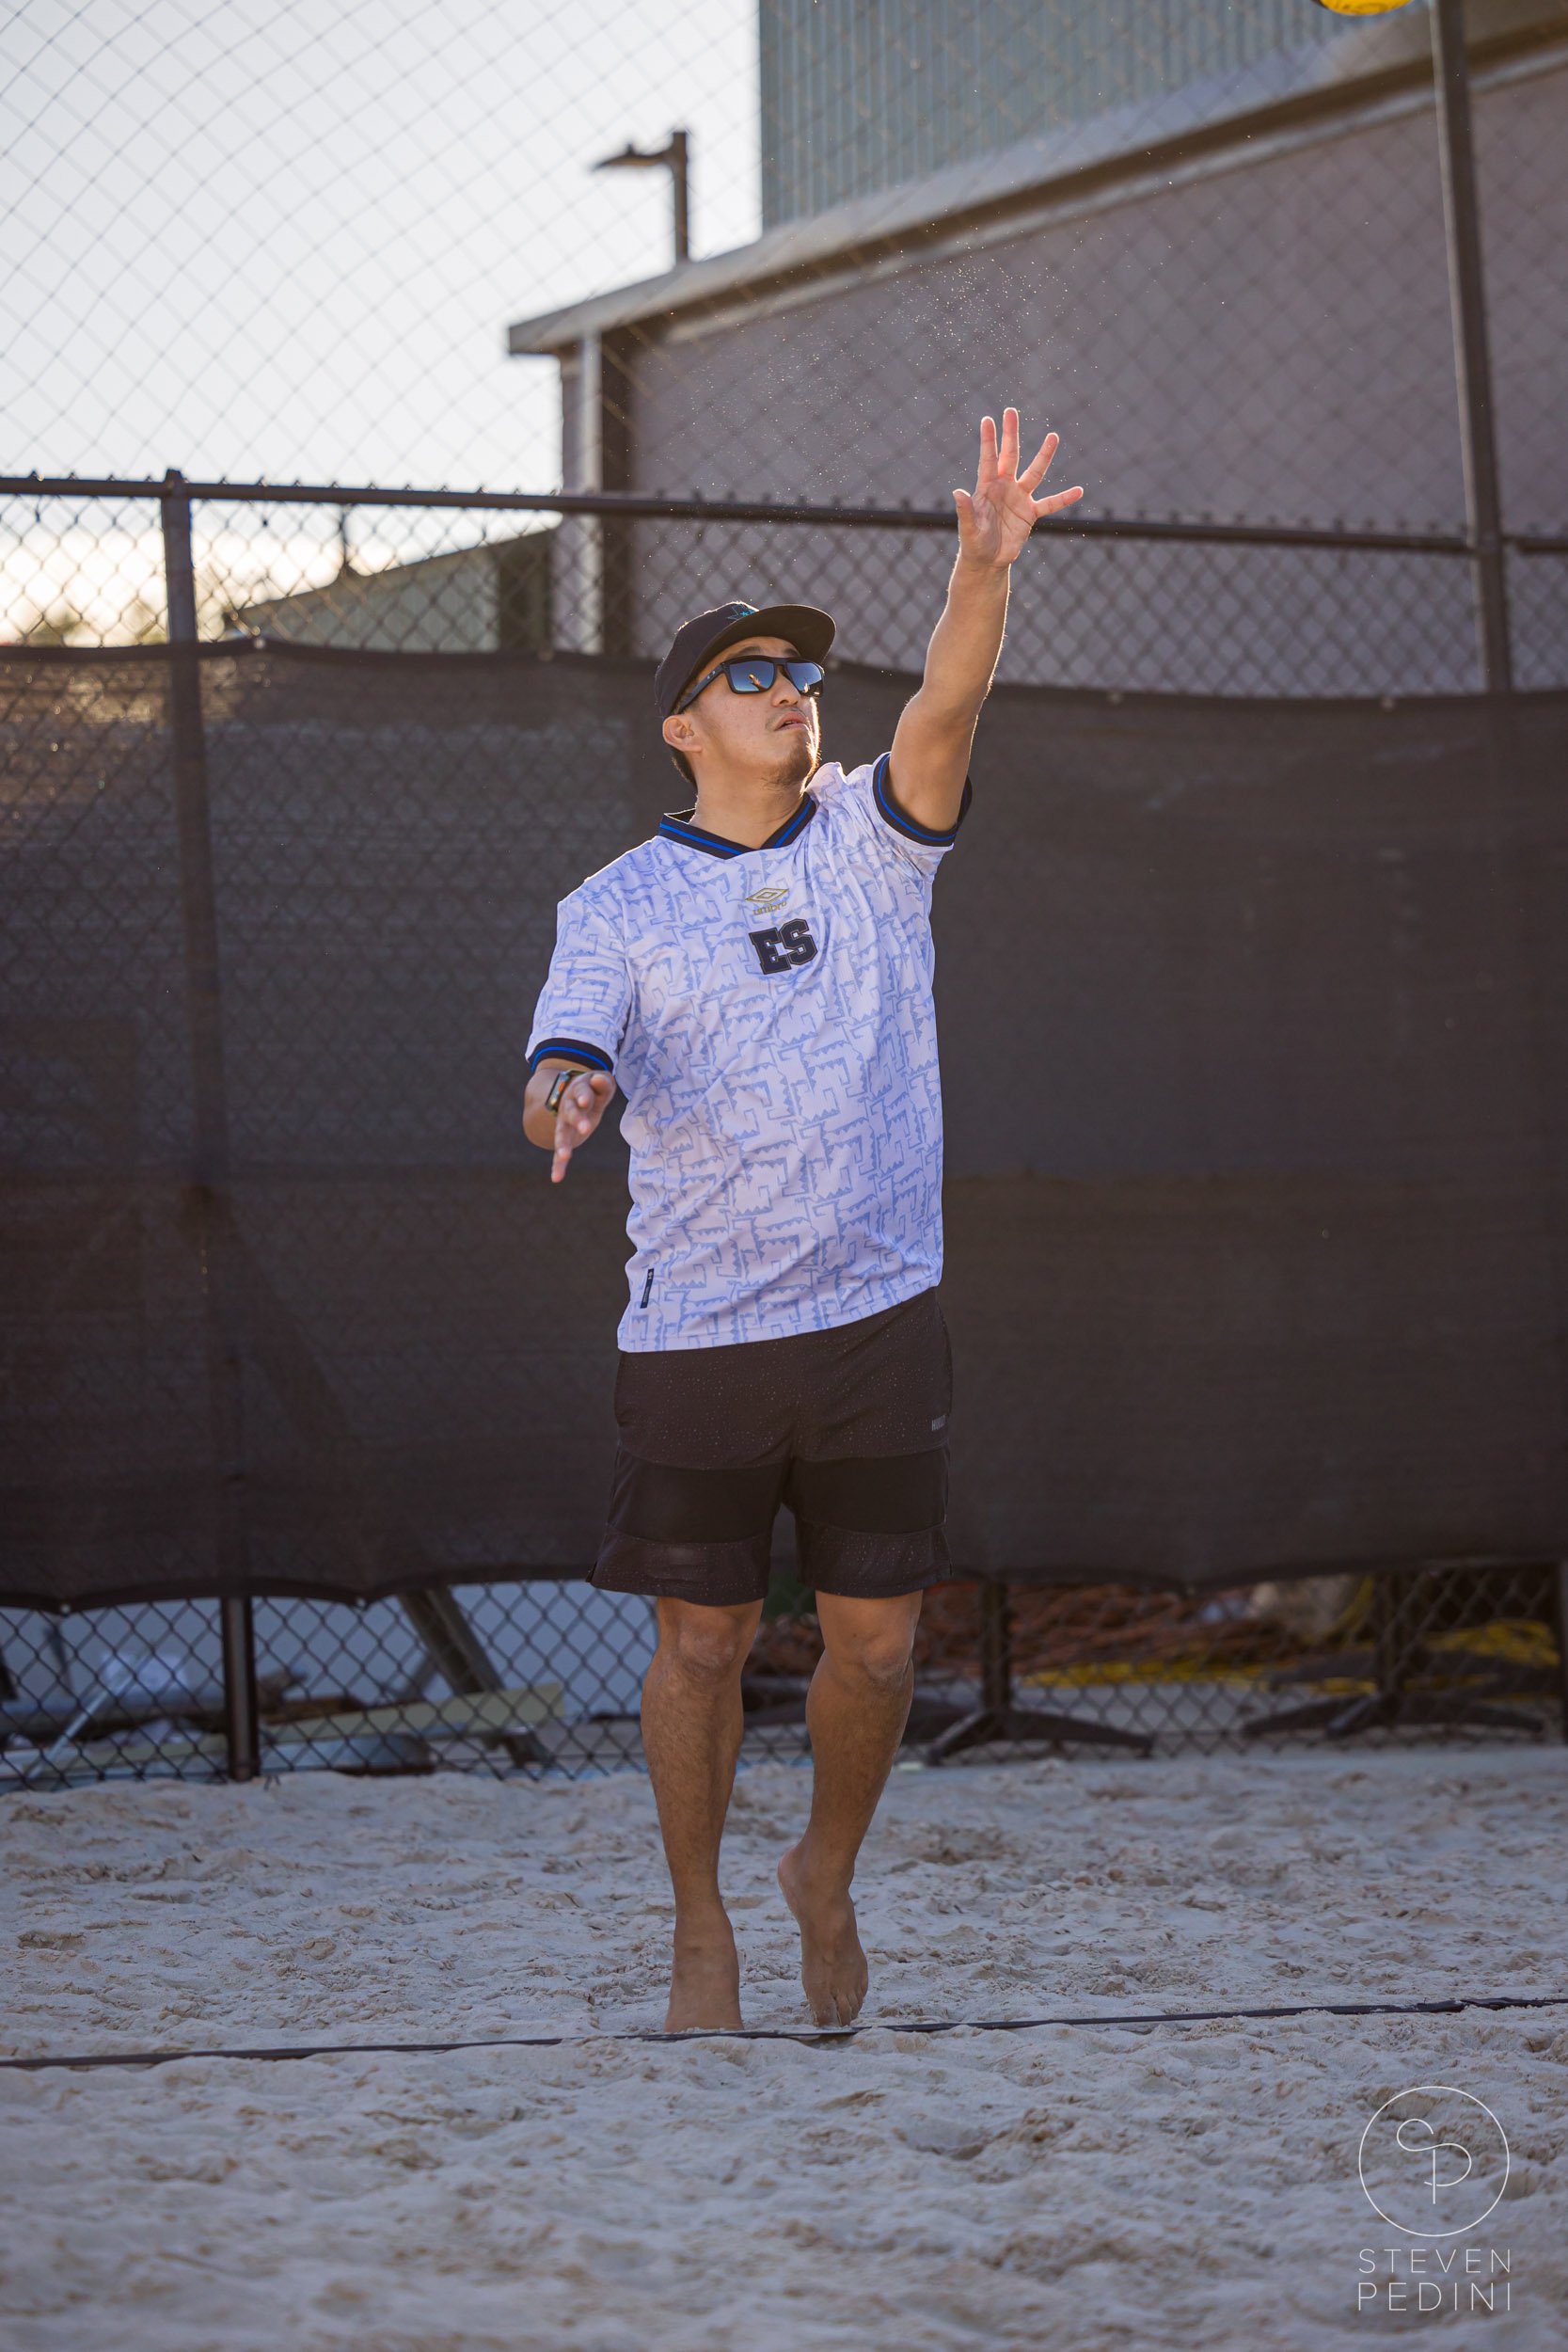 Steven Pedini Photography - Bumpy Pickle - Sand Volleyball - Houston TX - World Cup of Volleyball - 00065.jpg